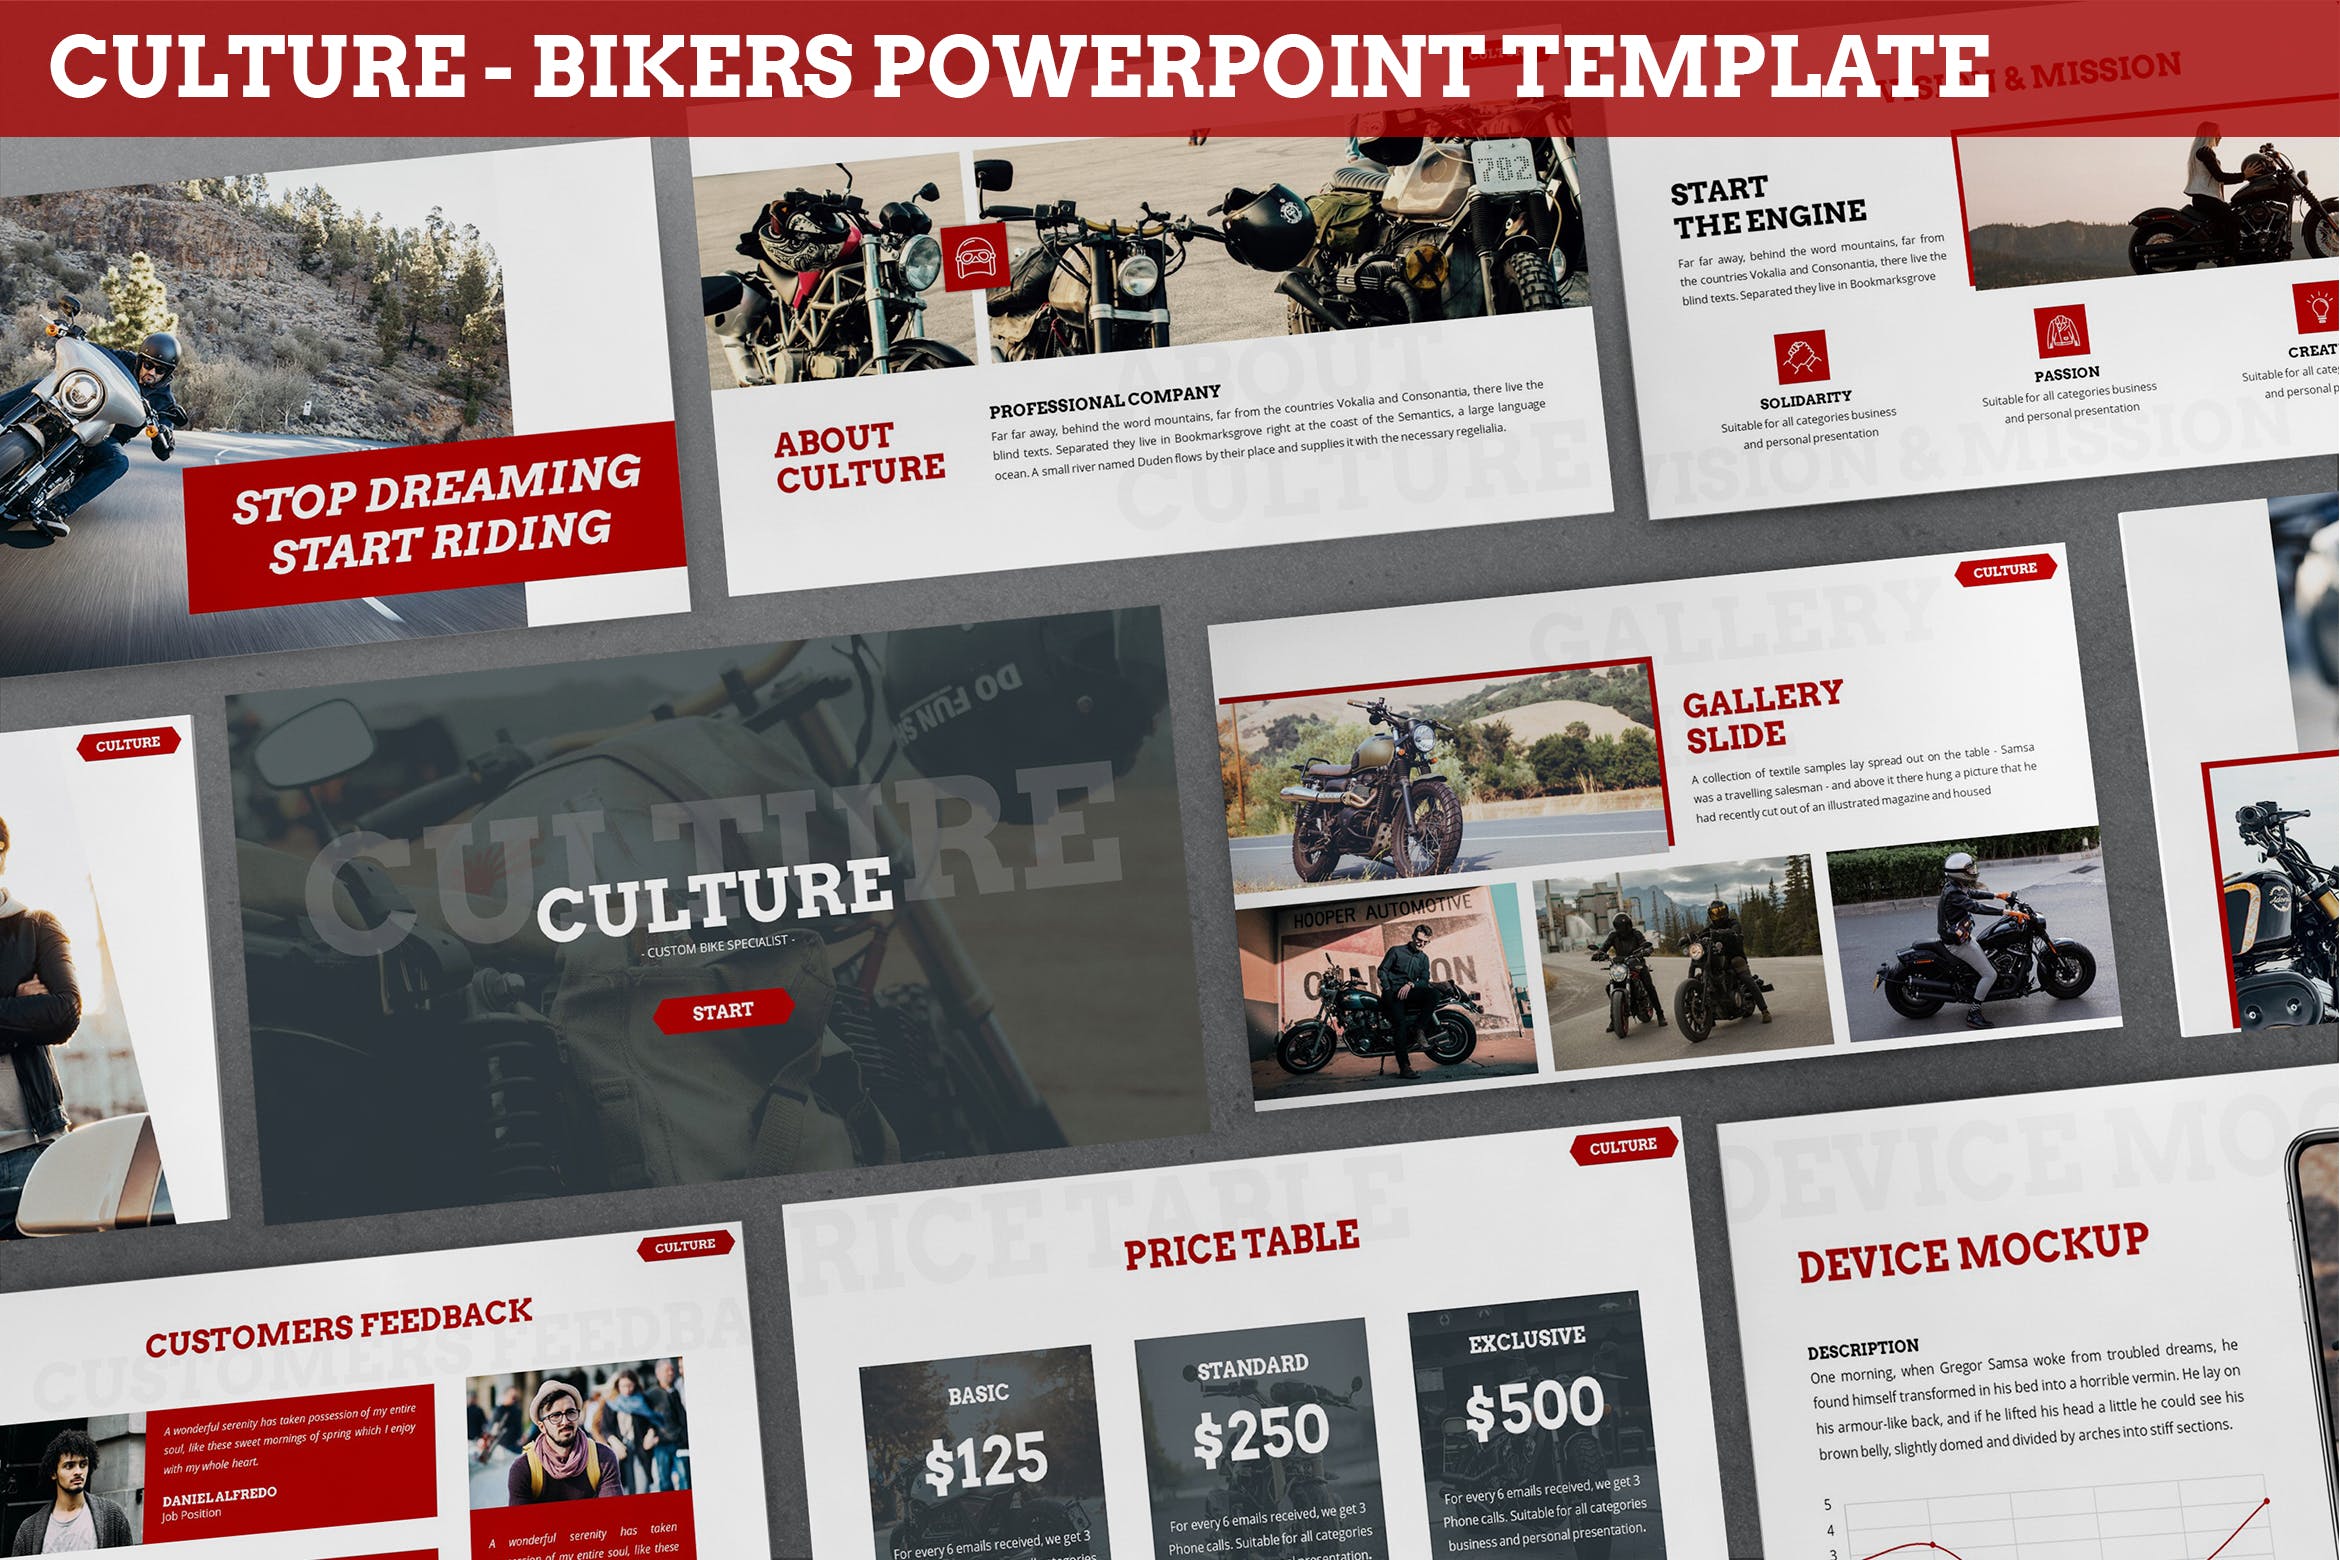 Cover image of Culture - Bikers Powerpoint Template.